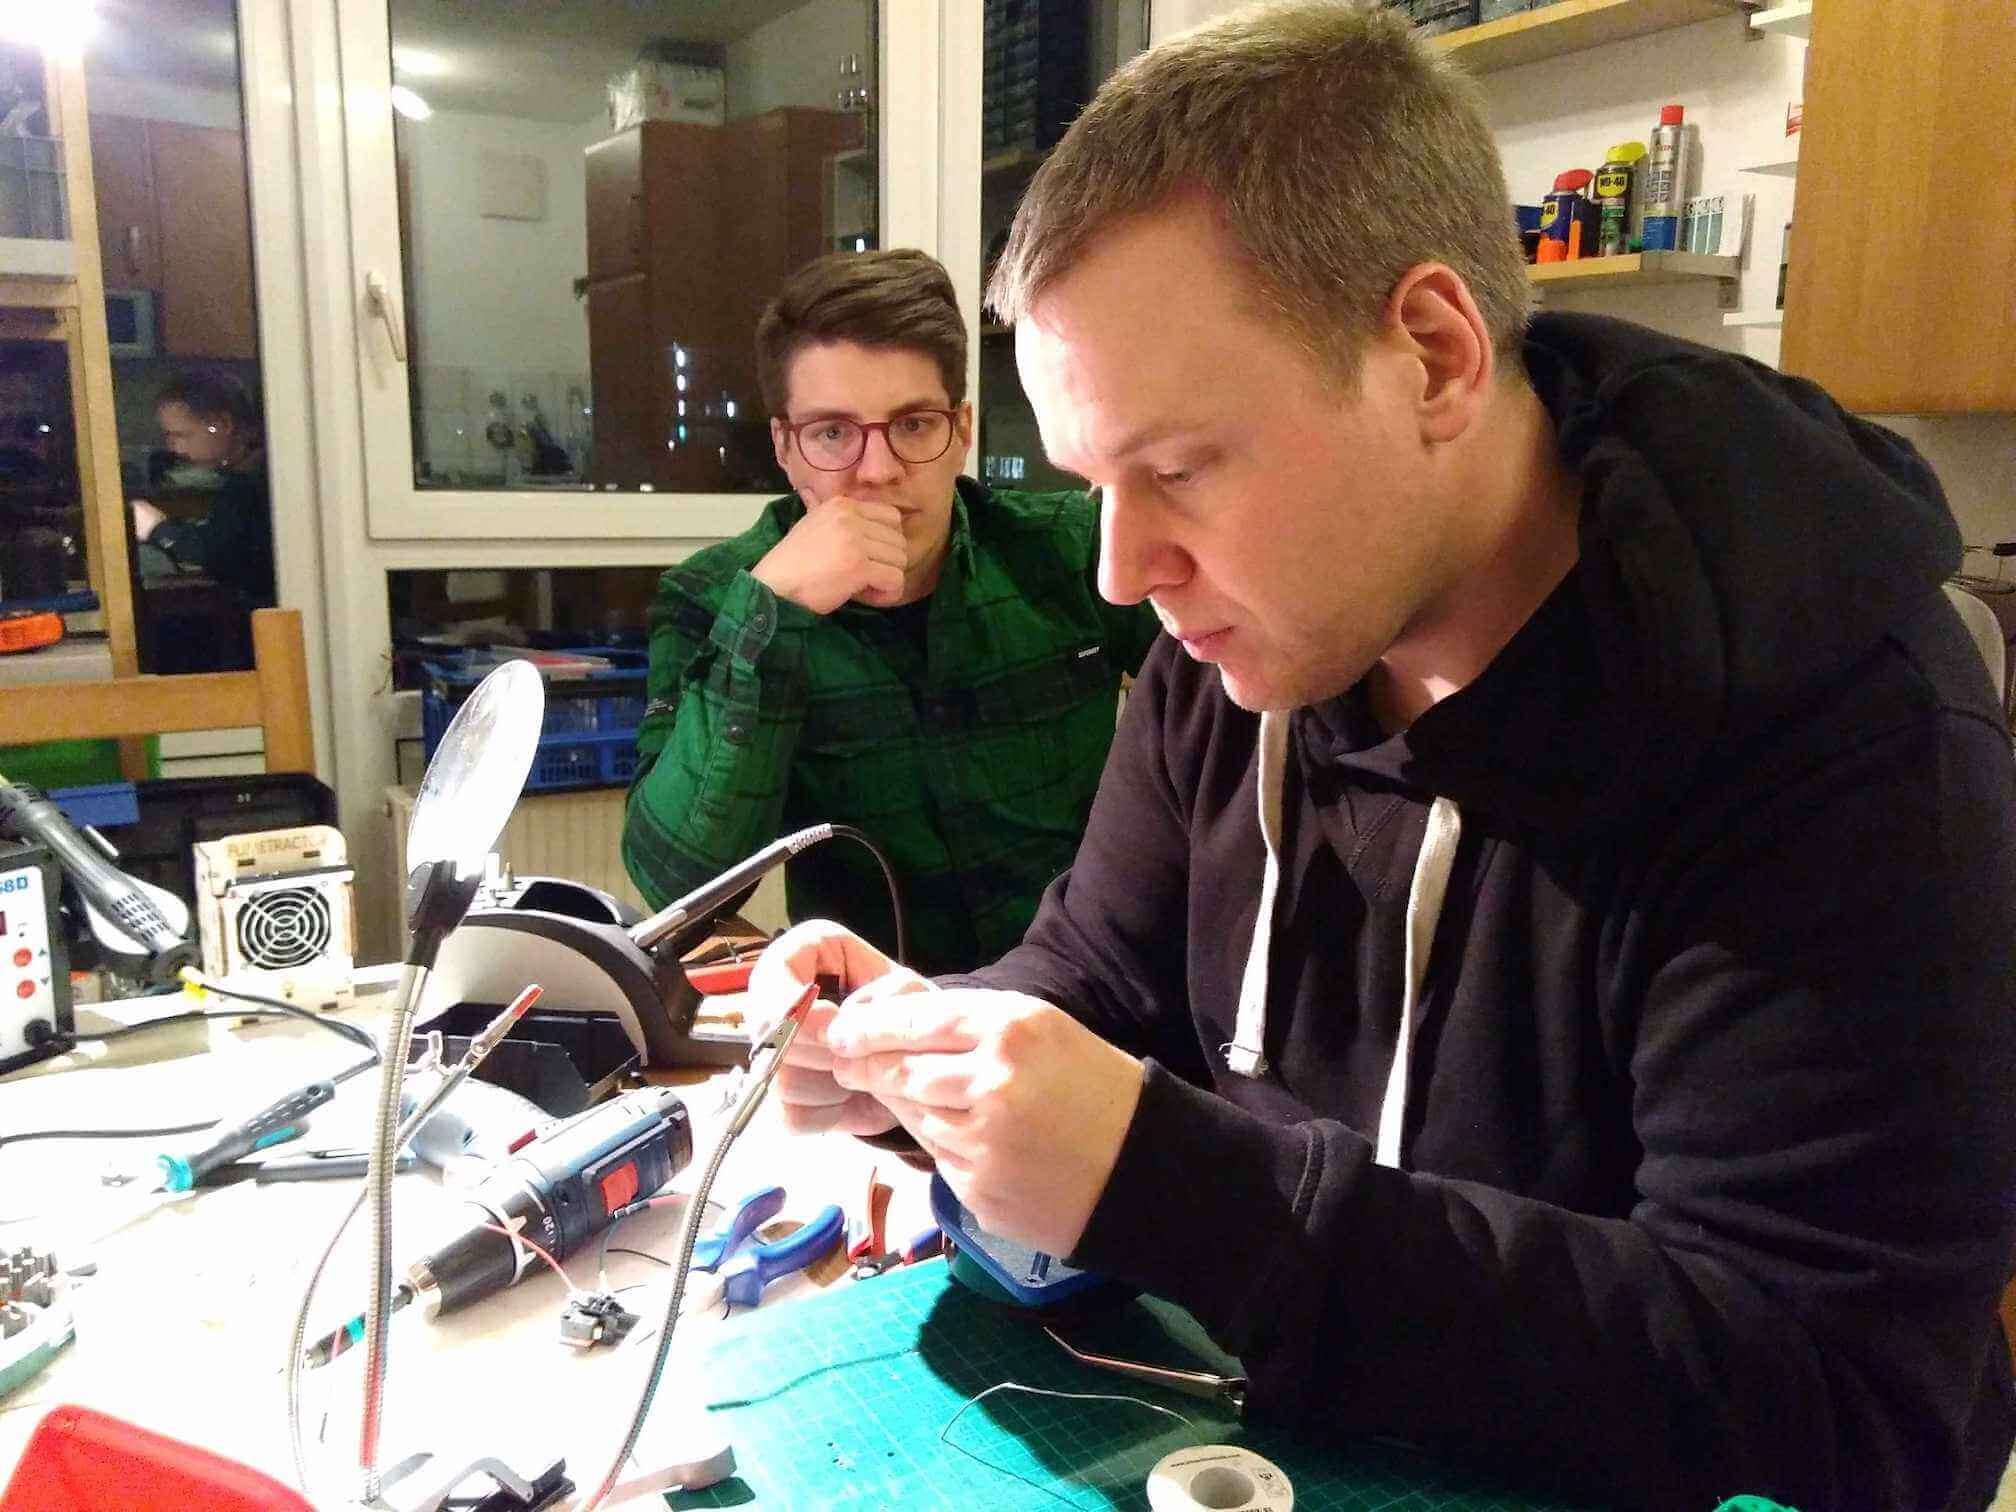 things with buzzers: Lars Heß needs to fix Andy Grunwald's hardware bugs.